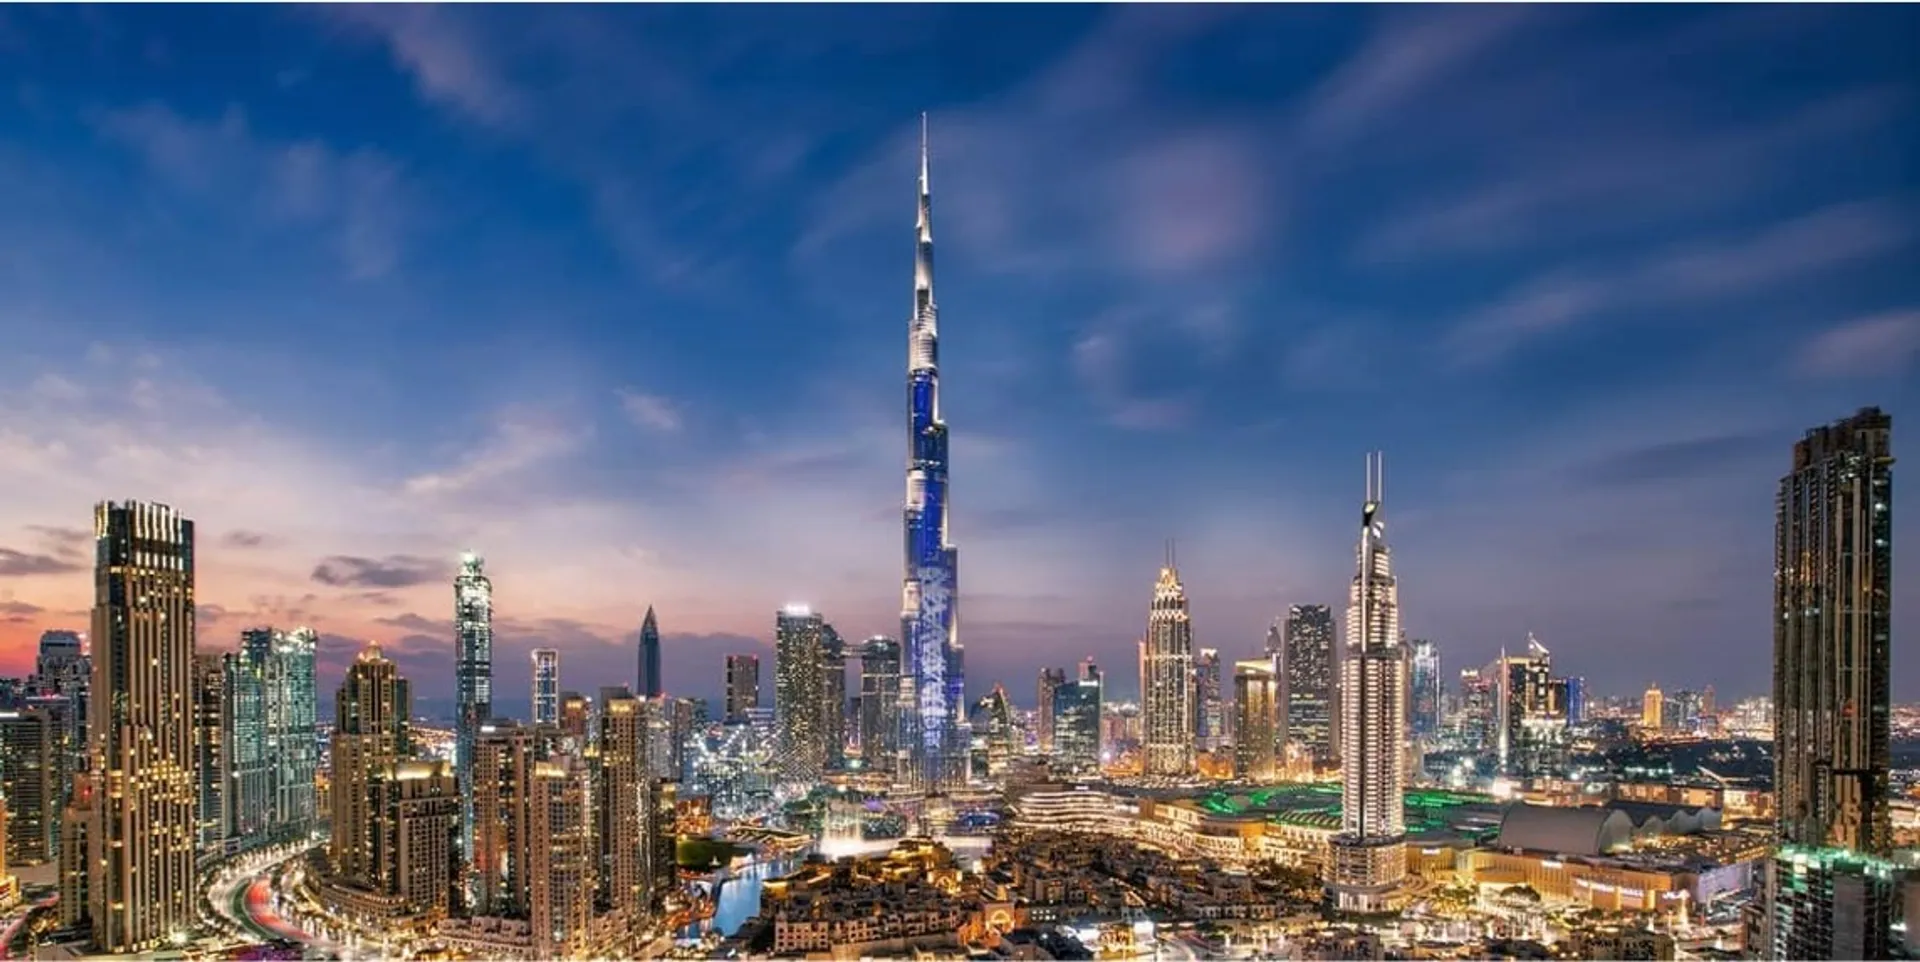 Just arrived in Dubai! Will be in this area until October. Excited to expand our business to the GCC. If anyone in this beautiful city wants to connect, just hit me up.